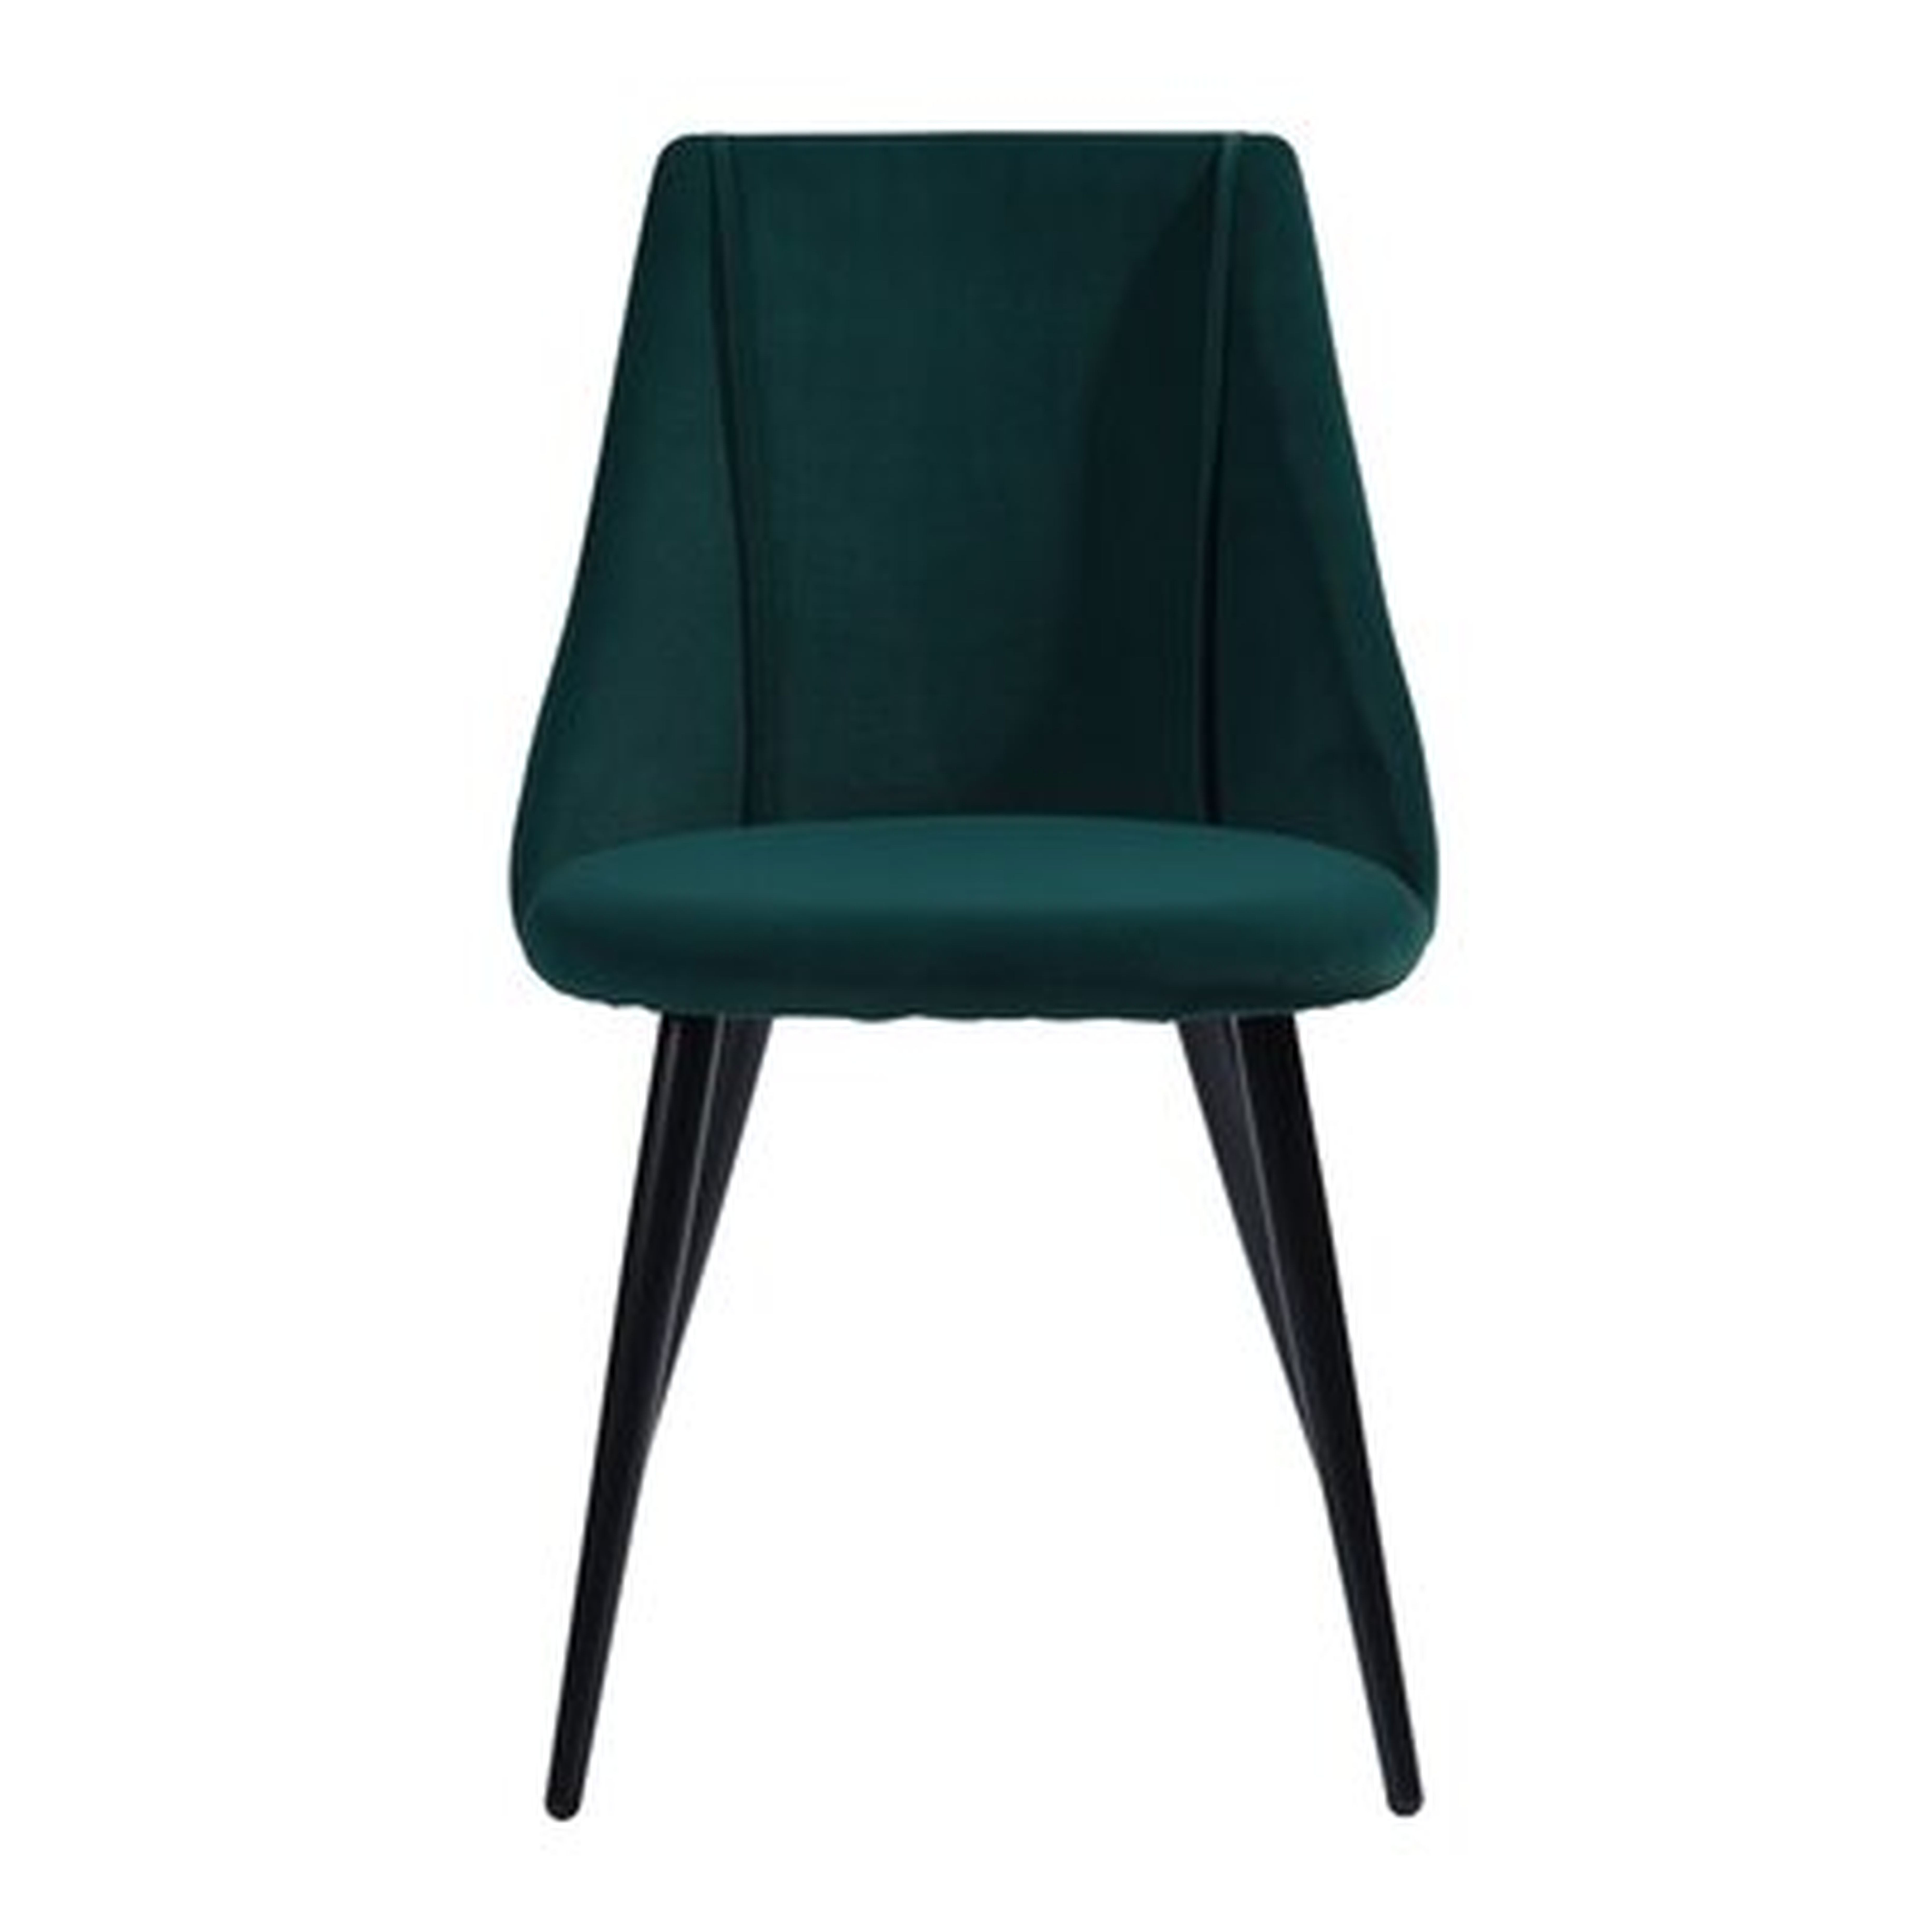 Camron Upholstered Side Chair - Wayfair